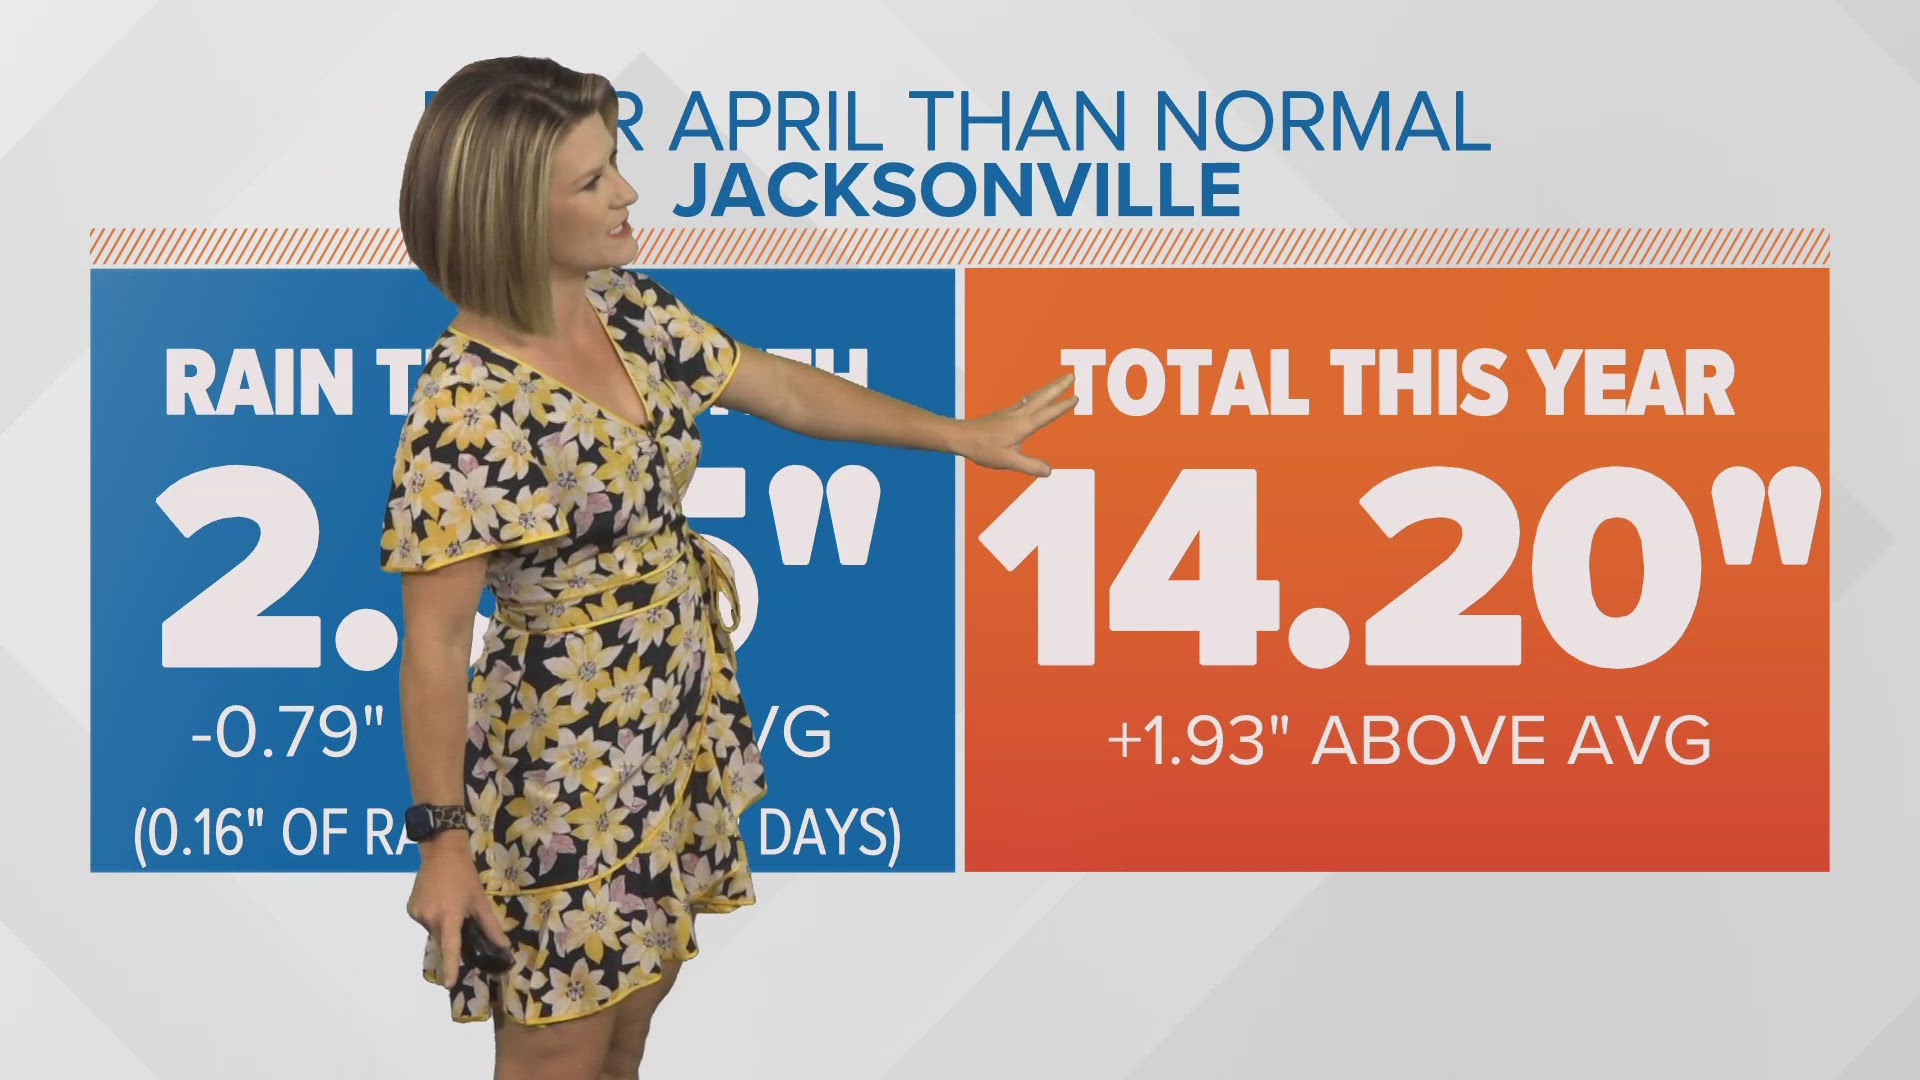 Meteorologist Lauren Rautenkranz says afternoon temperatures in the 80s will become the norm, but the humidity is also on the rise across Jacksonville.